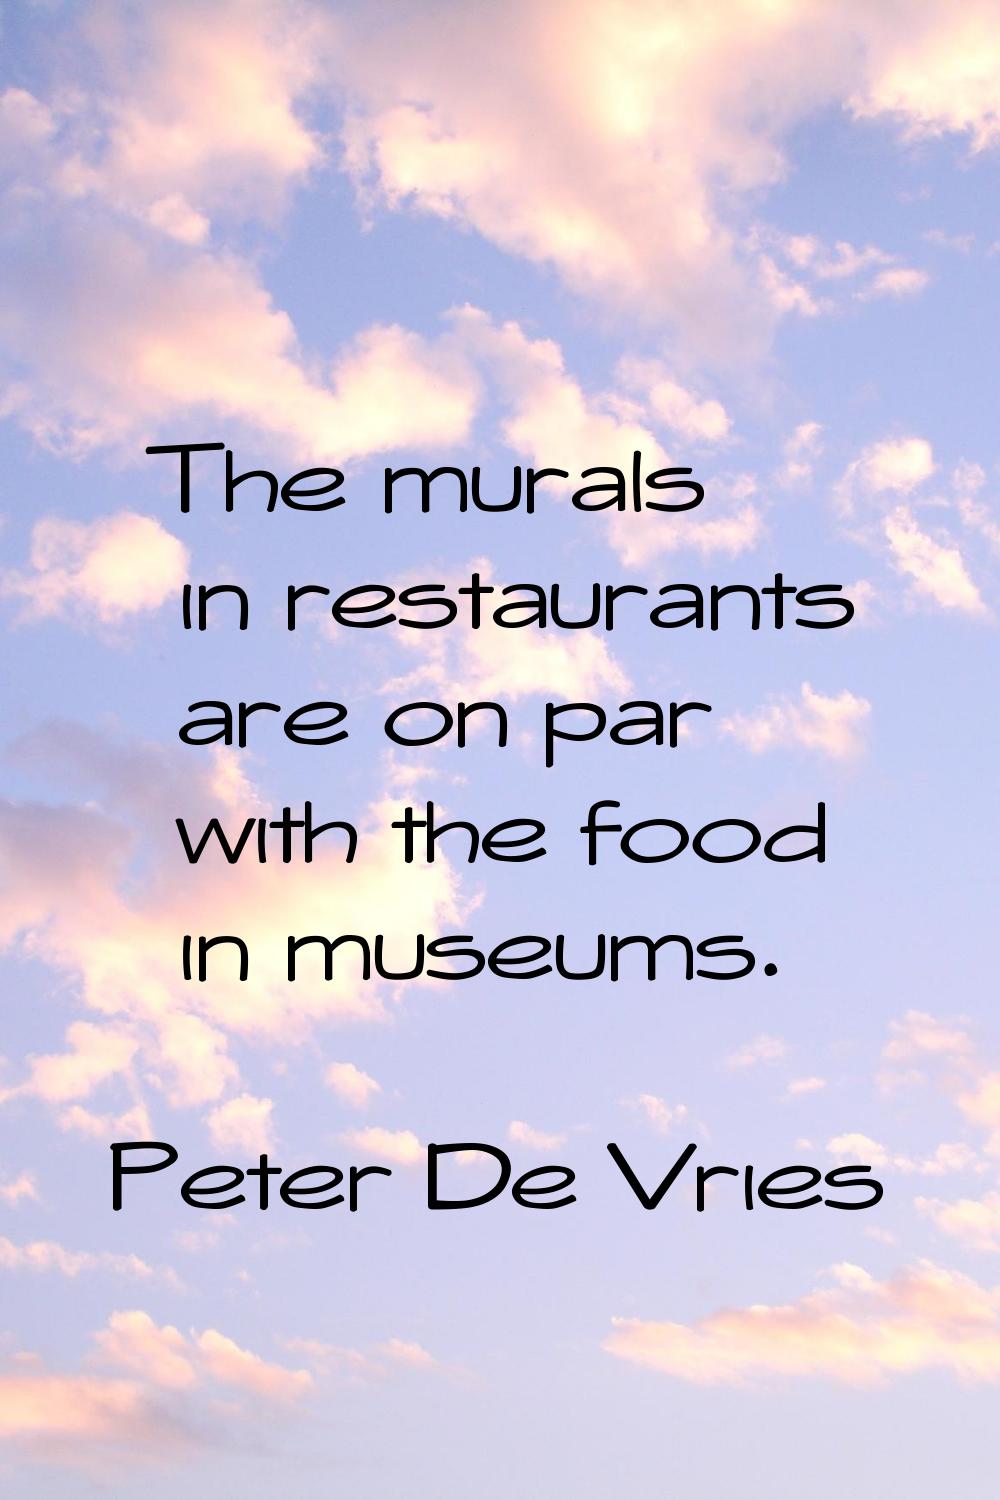 The murals in restaurants are on par with the food in museums.